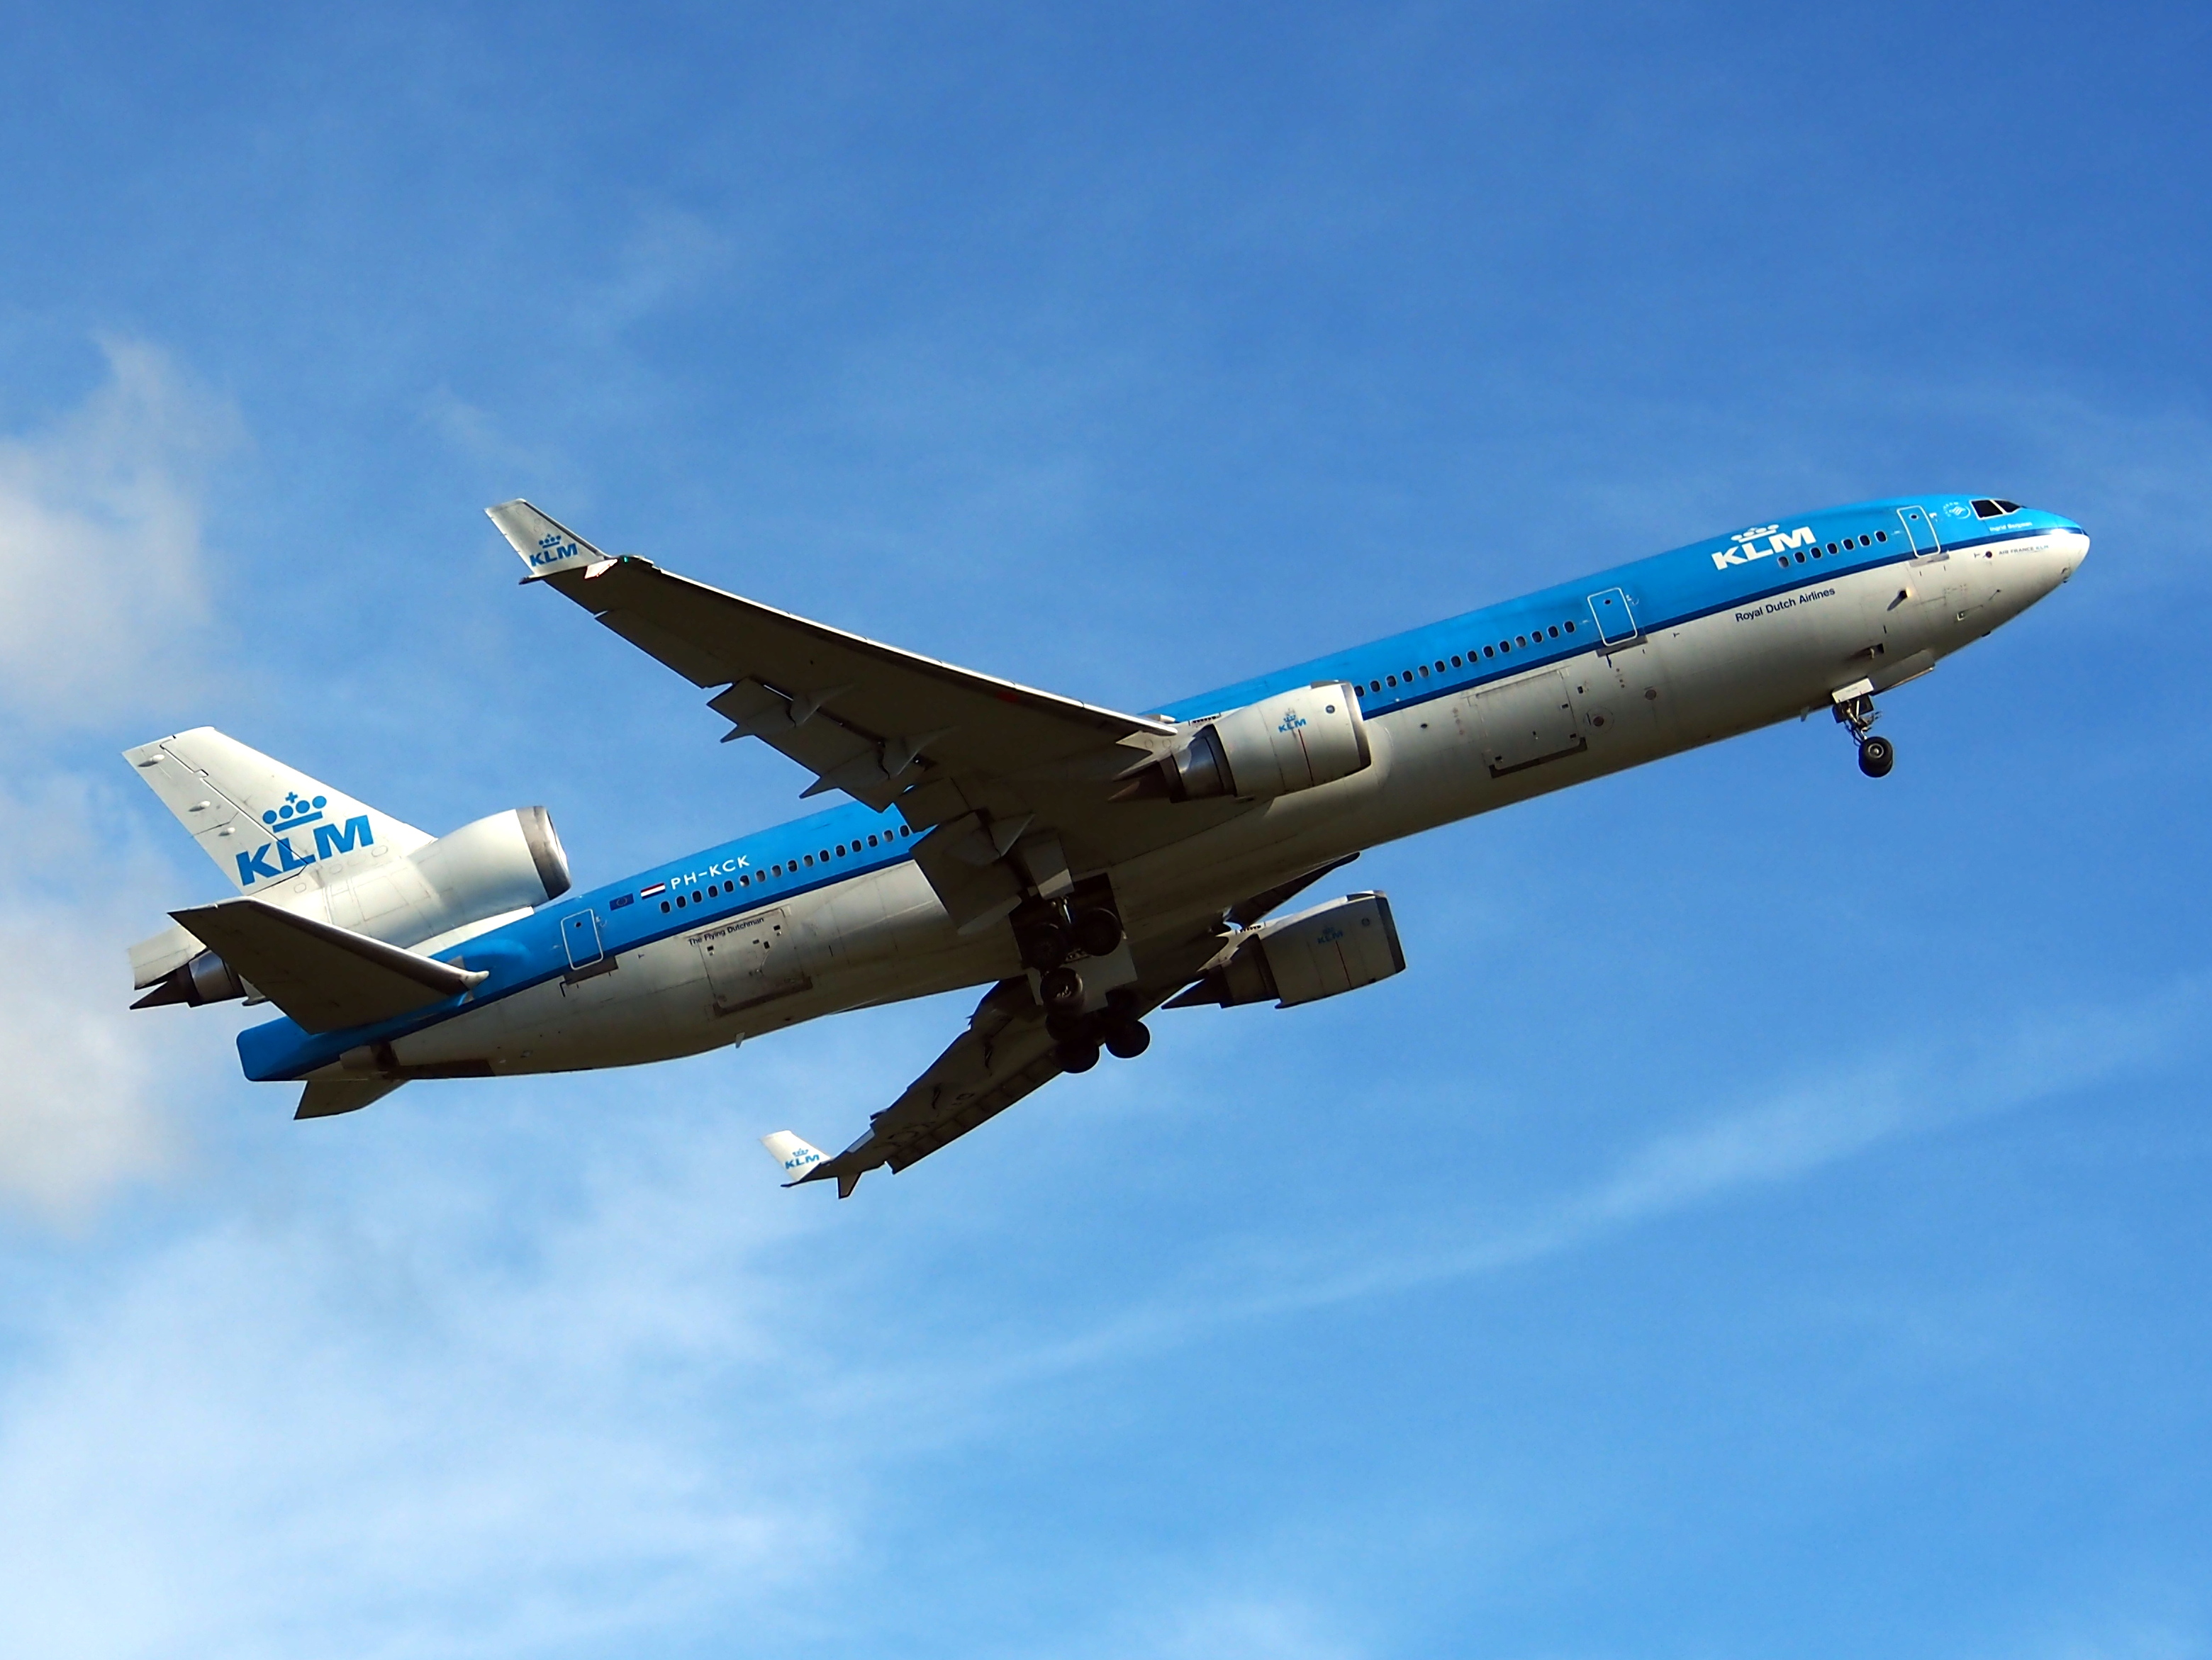 PH-KCK KLM Royal Dutch Airlines McDonnell Douglas MD-11 take-off pic2